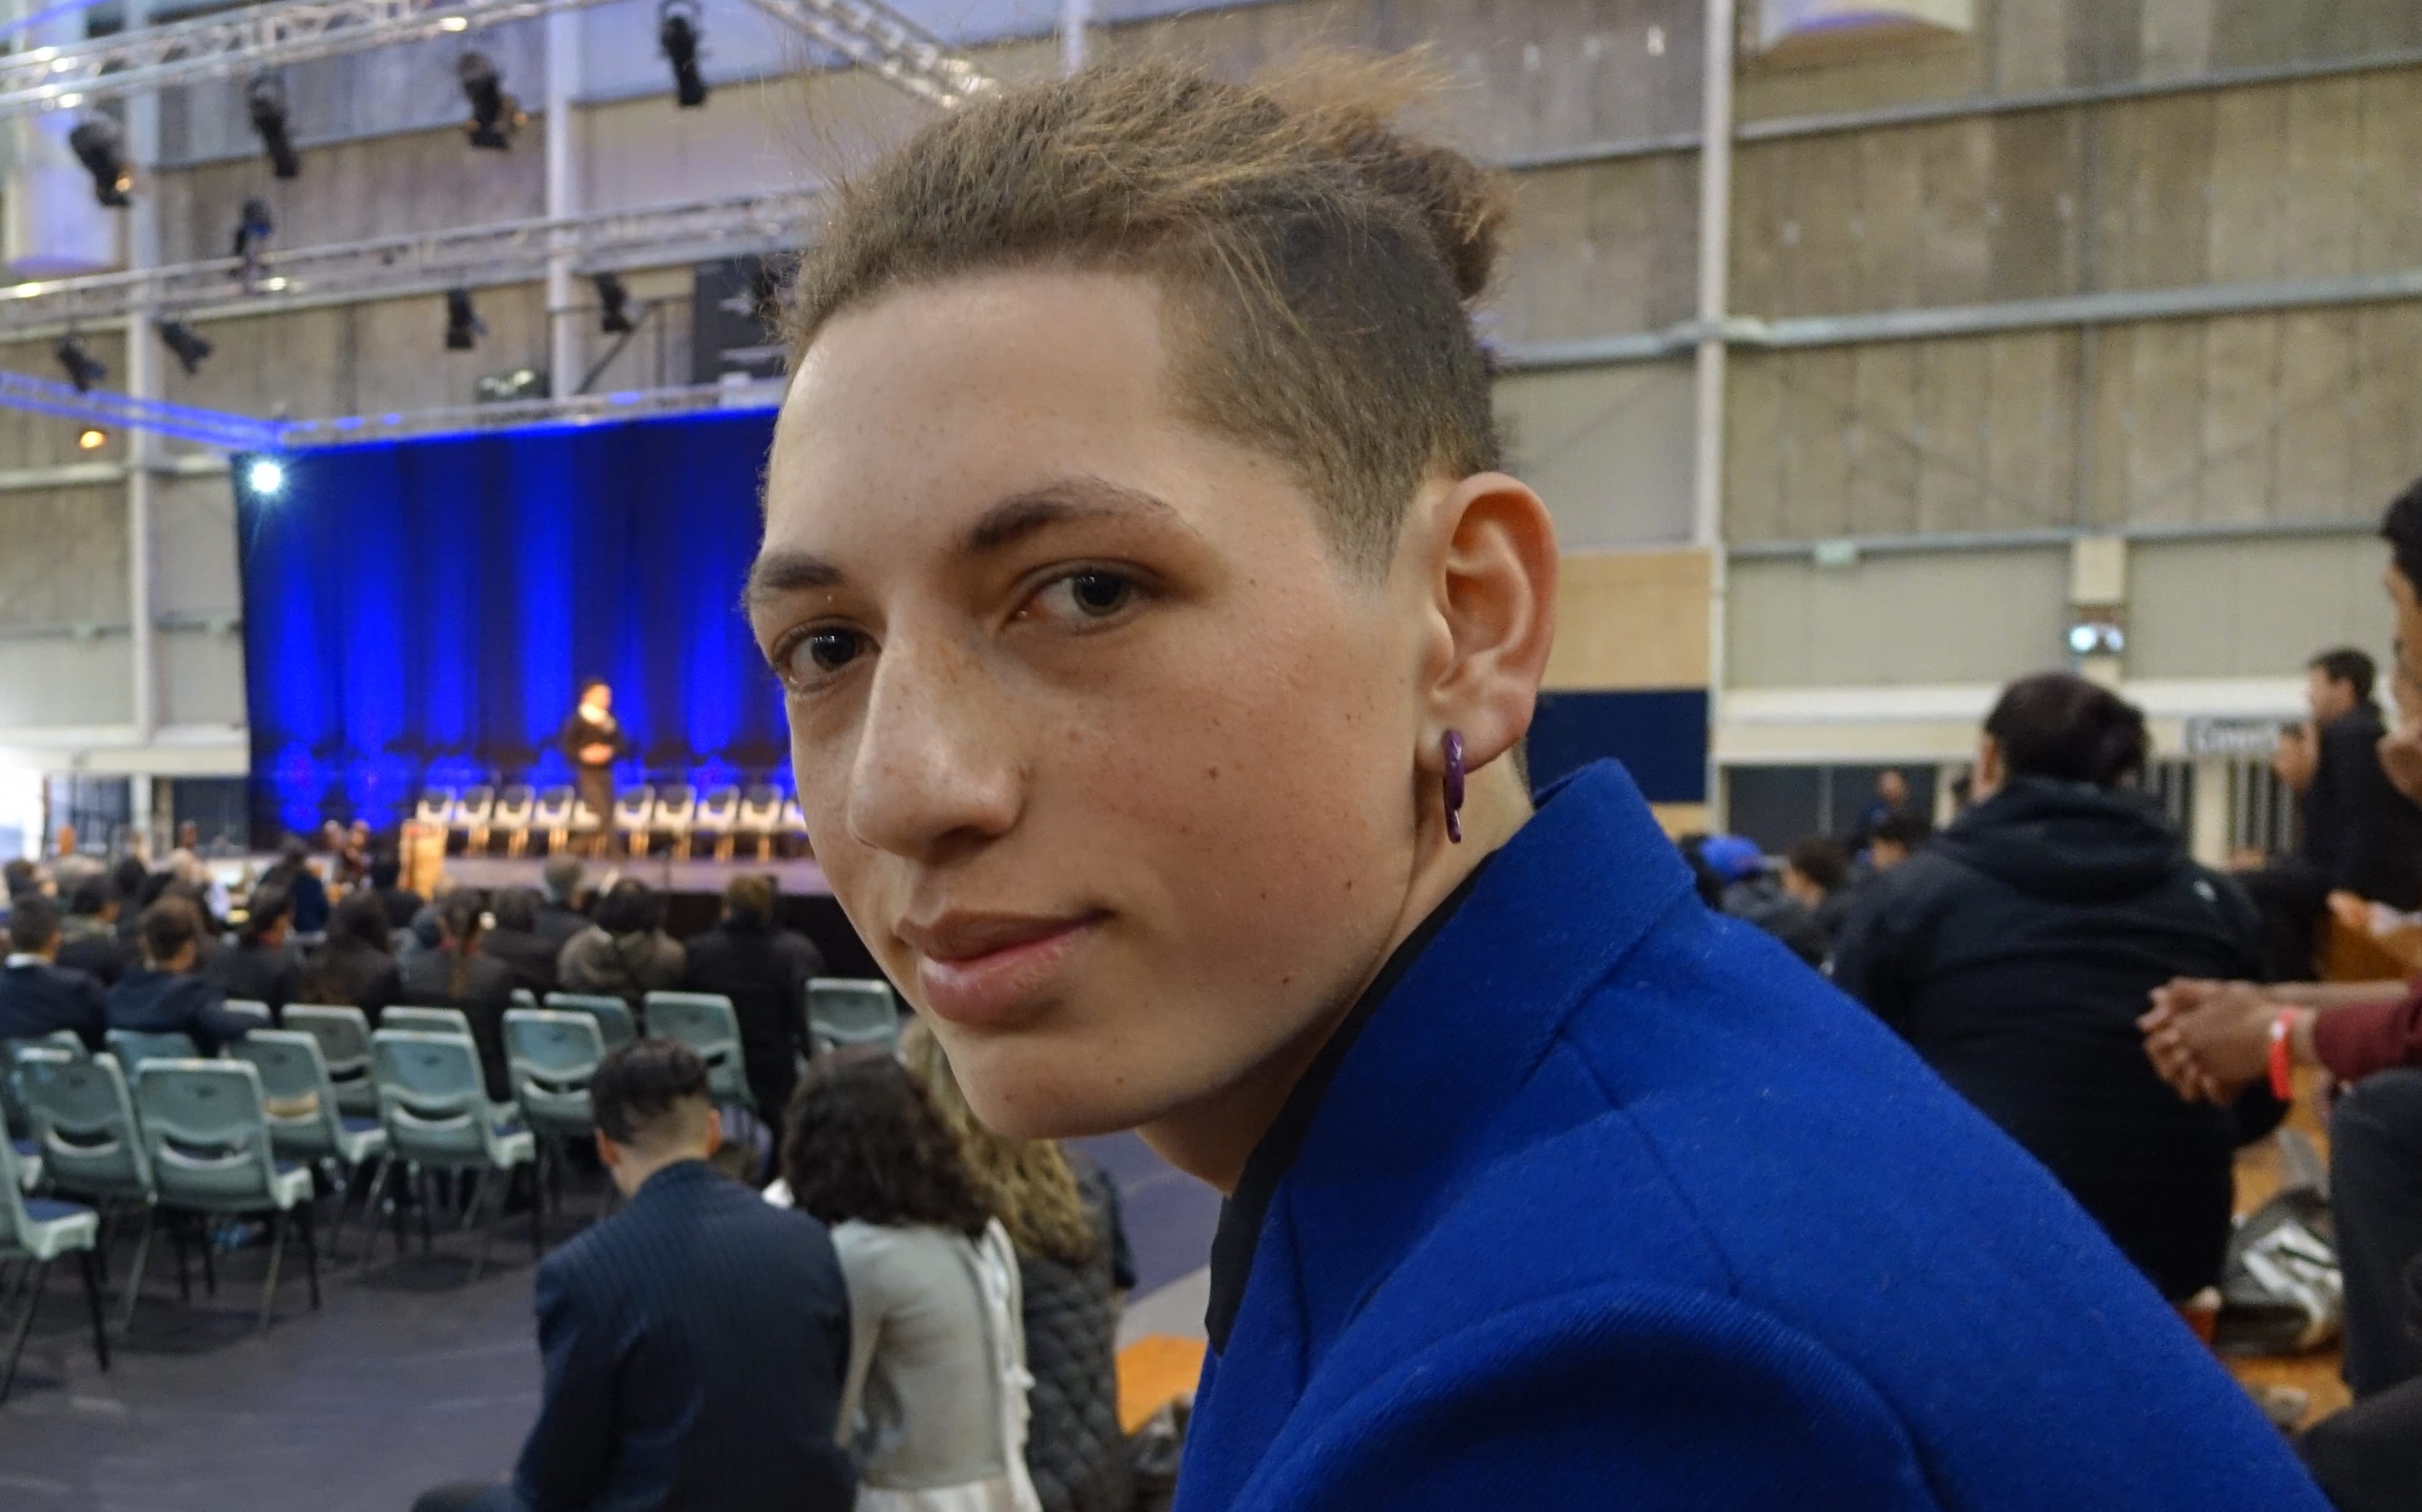 Tawa College student Te Maia McKenzie, 16, said listening to the ideas expressed by other competitors is one of he thrills of Ngā Manu Kōrero.